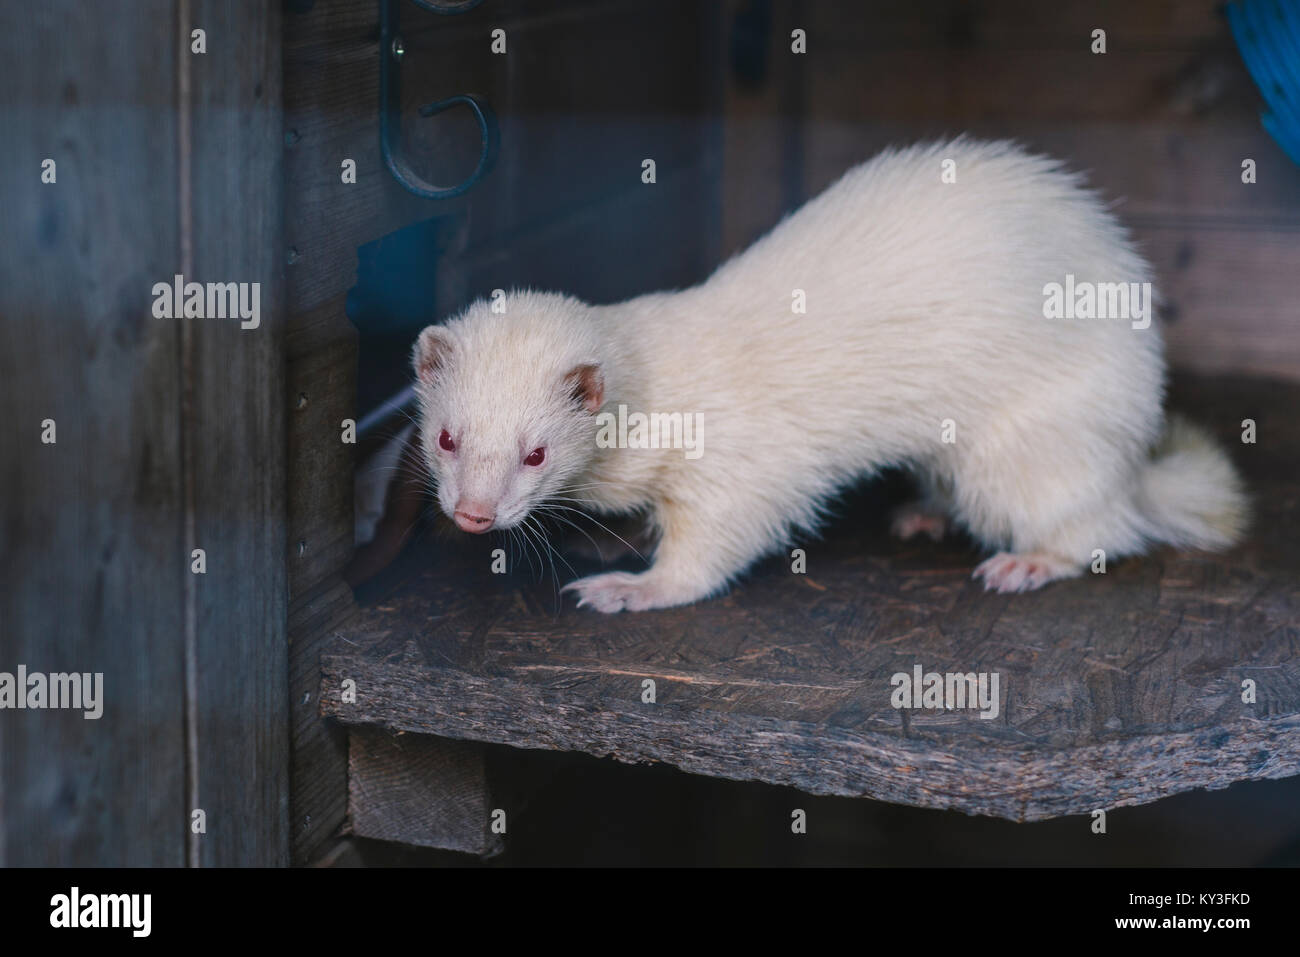 Albino Ferret High Resolution Stock Photography And Images Alamy